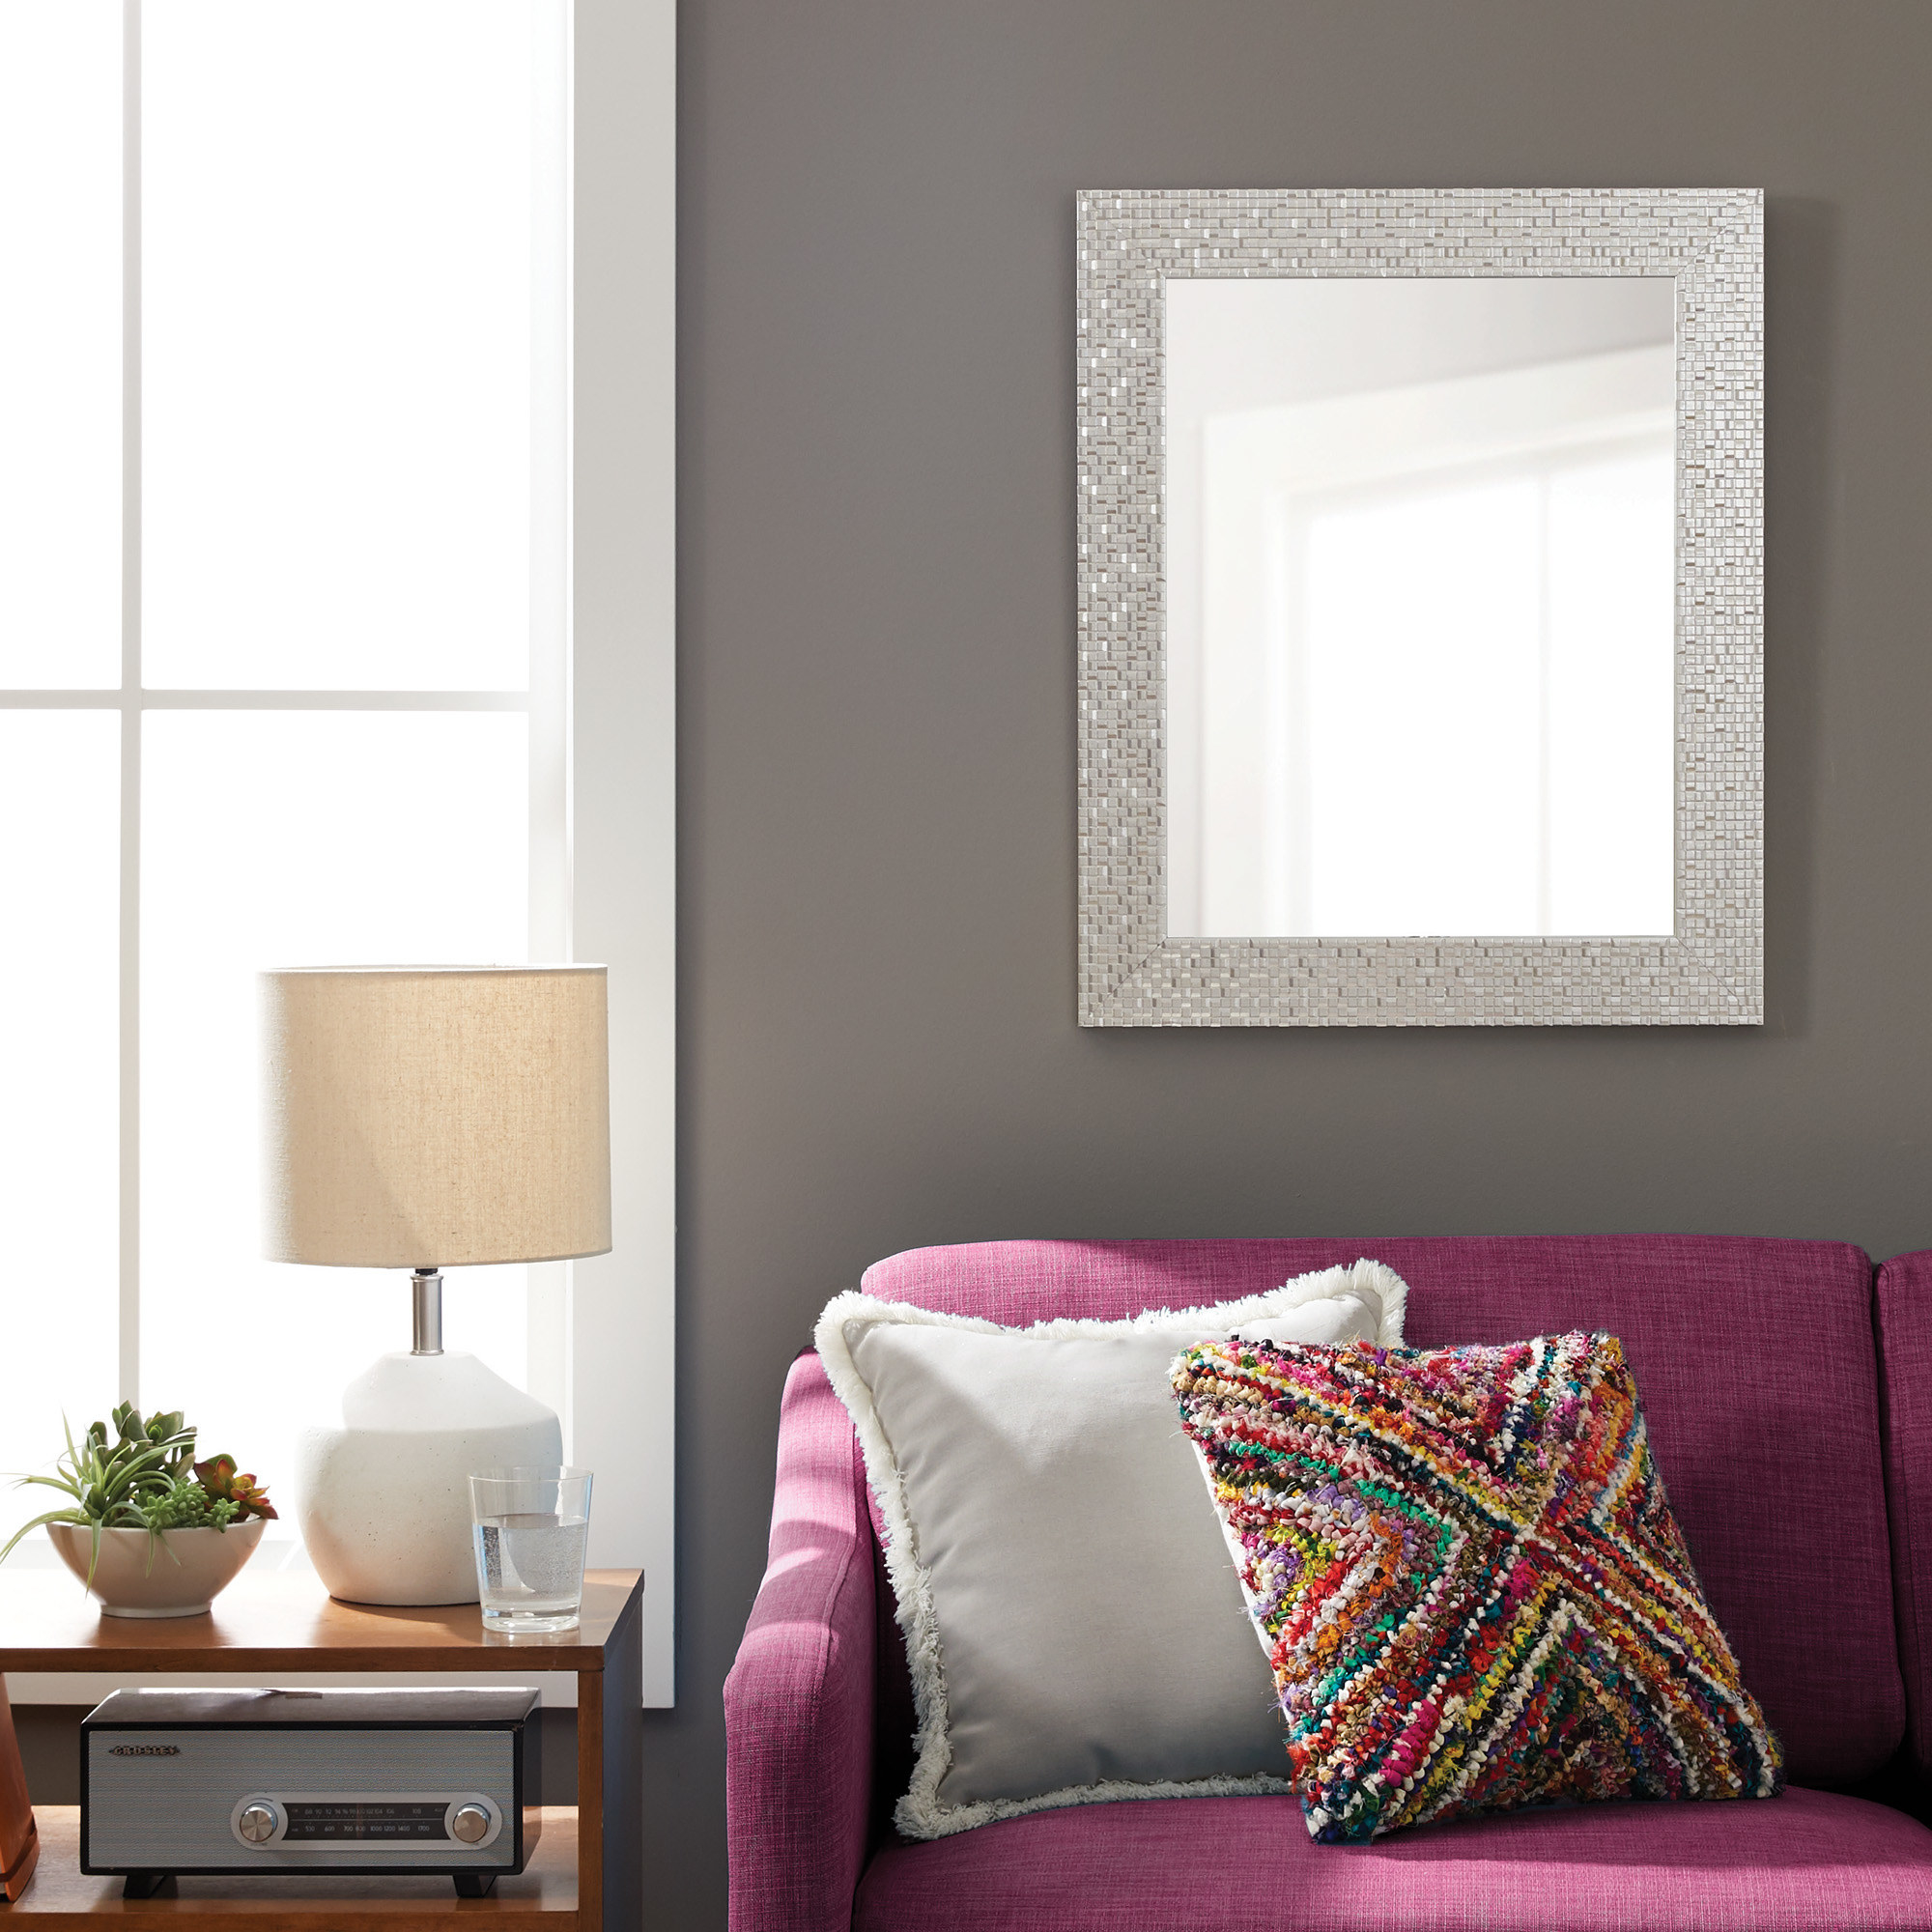 A silver mosaic mirror hanging over a magenta couch